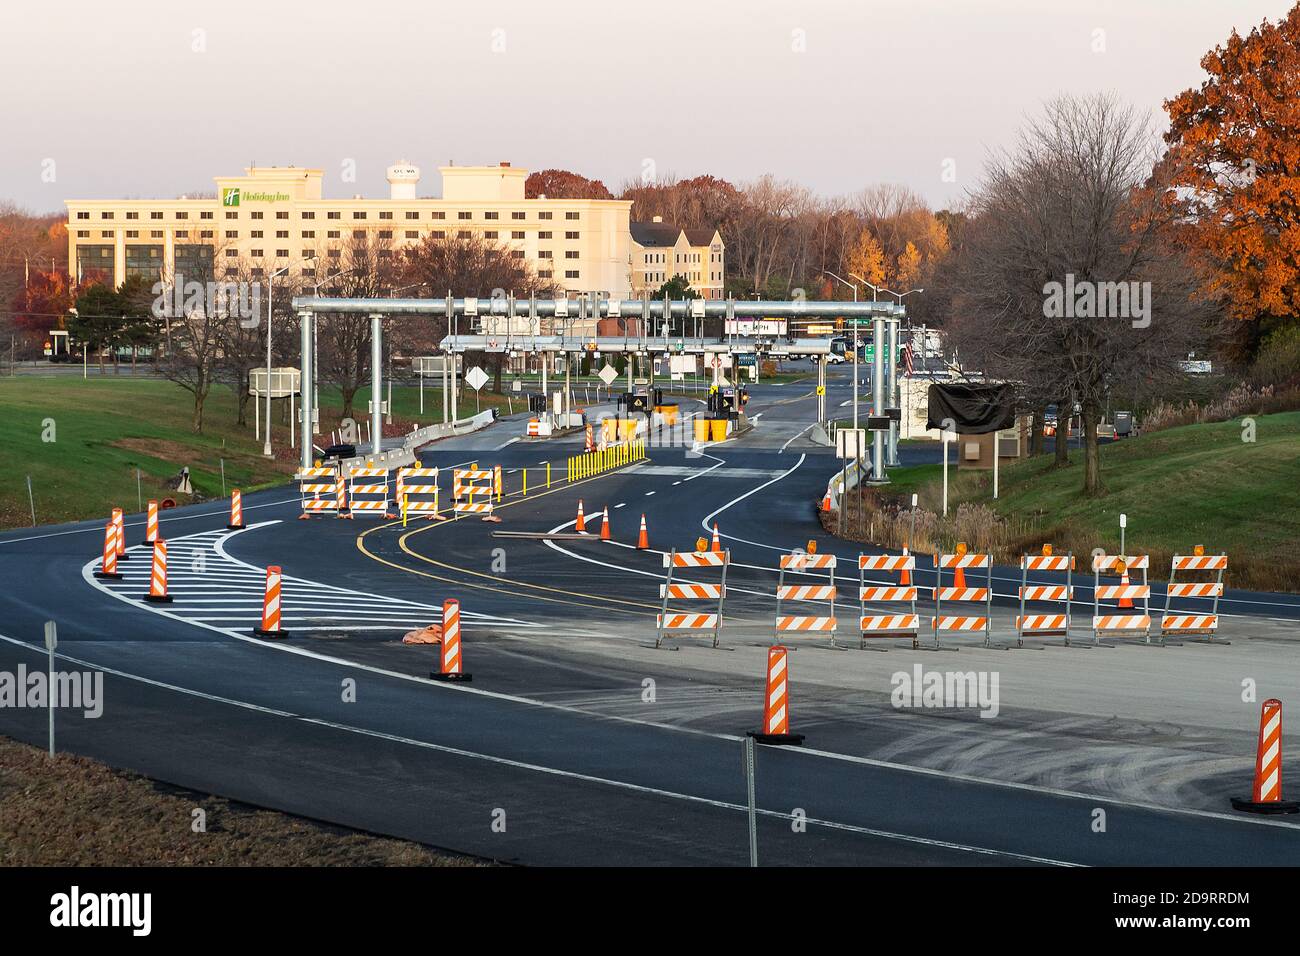 Liverpool, New York, USA. November 7, 2020. Cashless tolling system being installed to replace toll booths along the New York State Thruway at the Ele Stock Photo